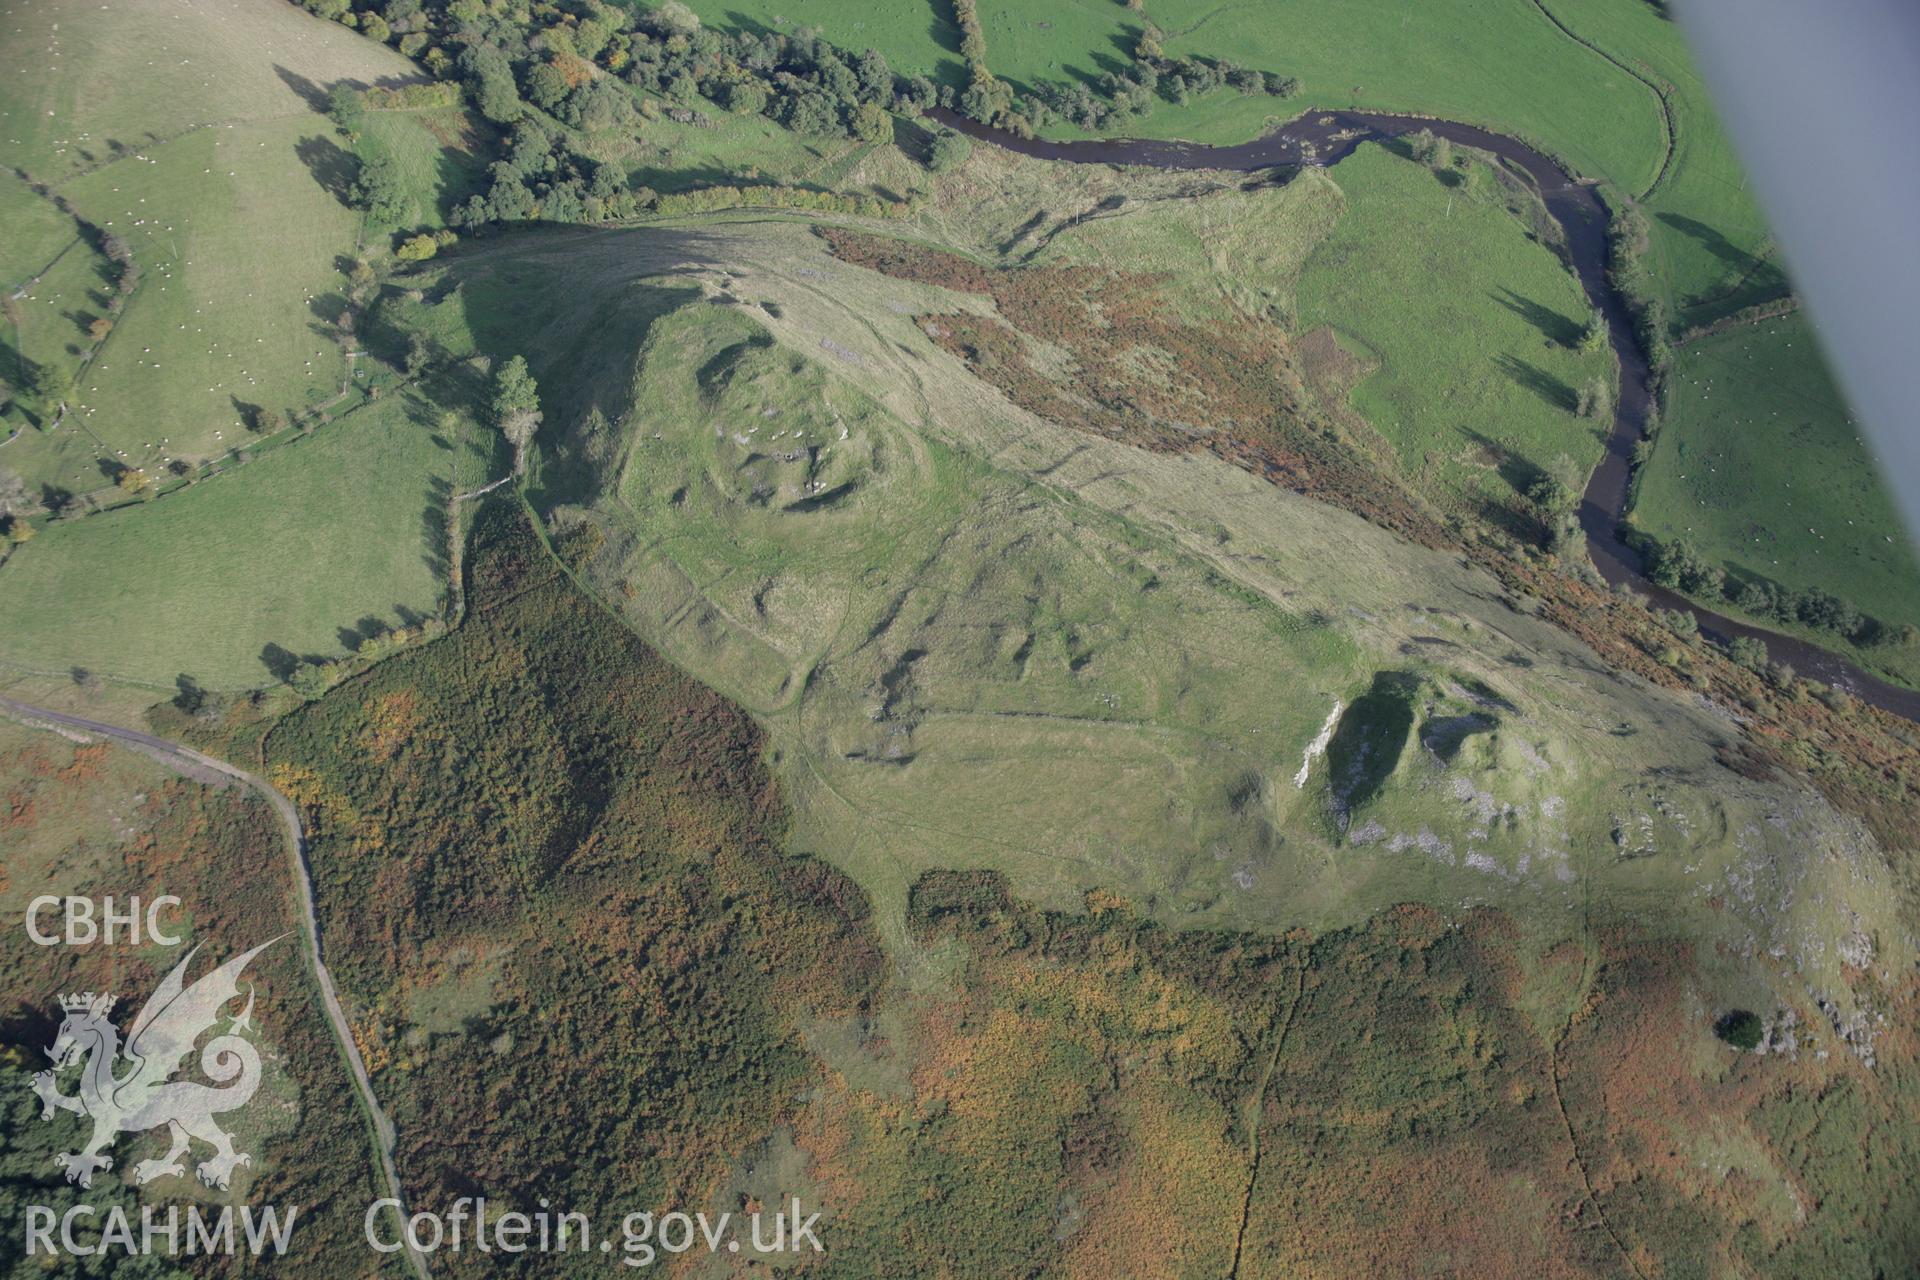 RCAHMW colour oblique aerial photograph of Cefnllys Castle from the north-west. Taken on 13 October 2005 by Toby Driver